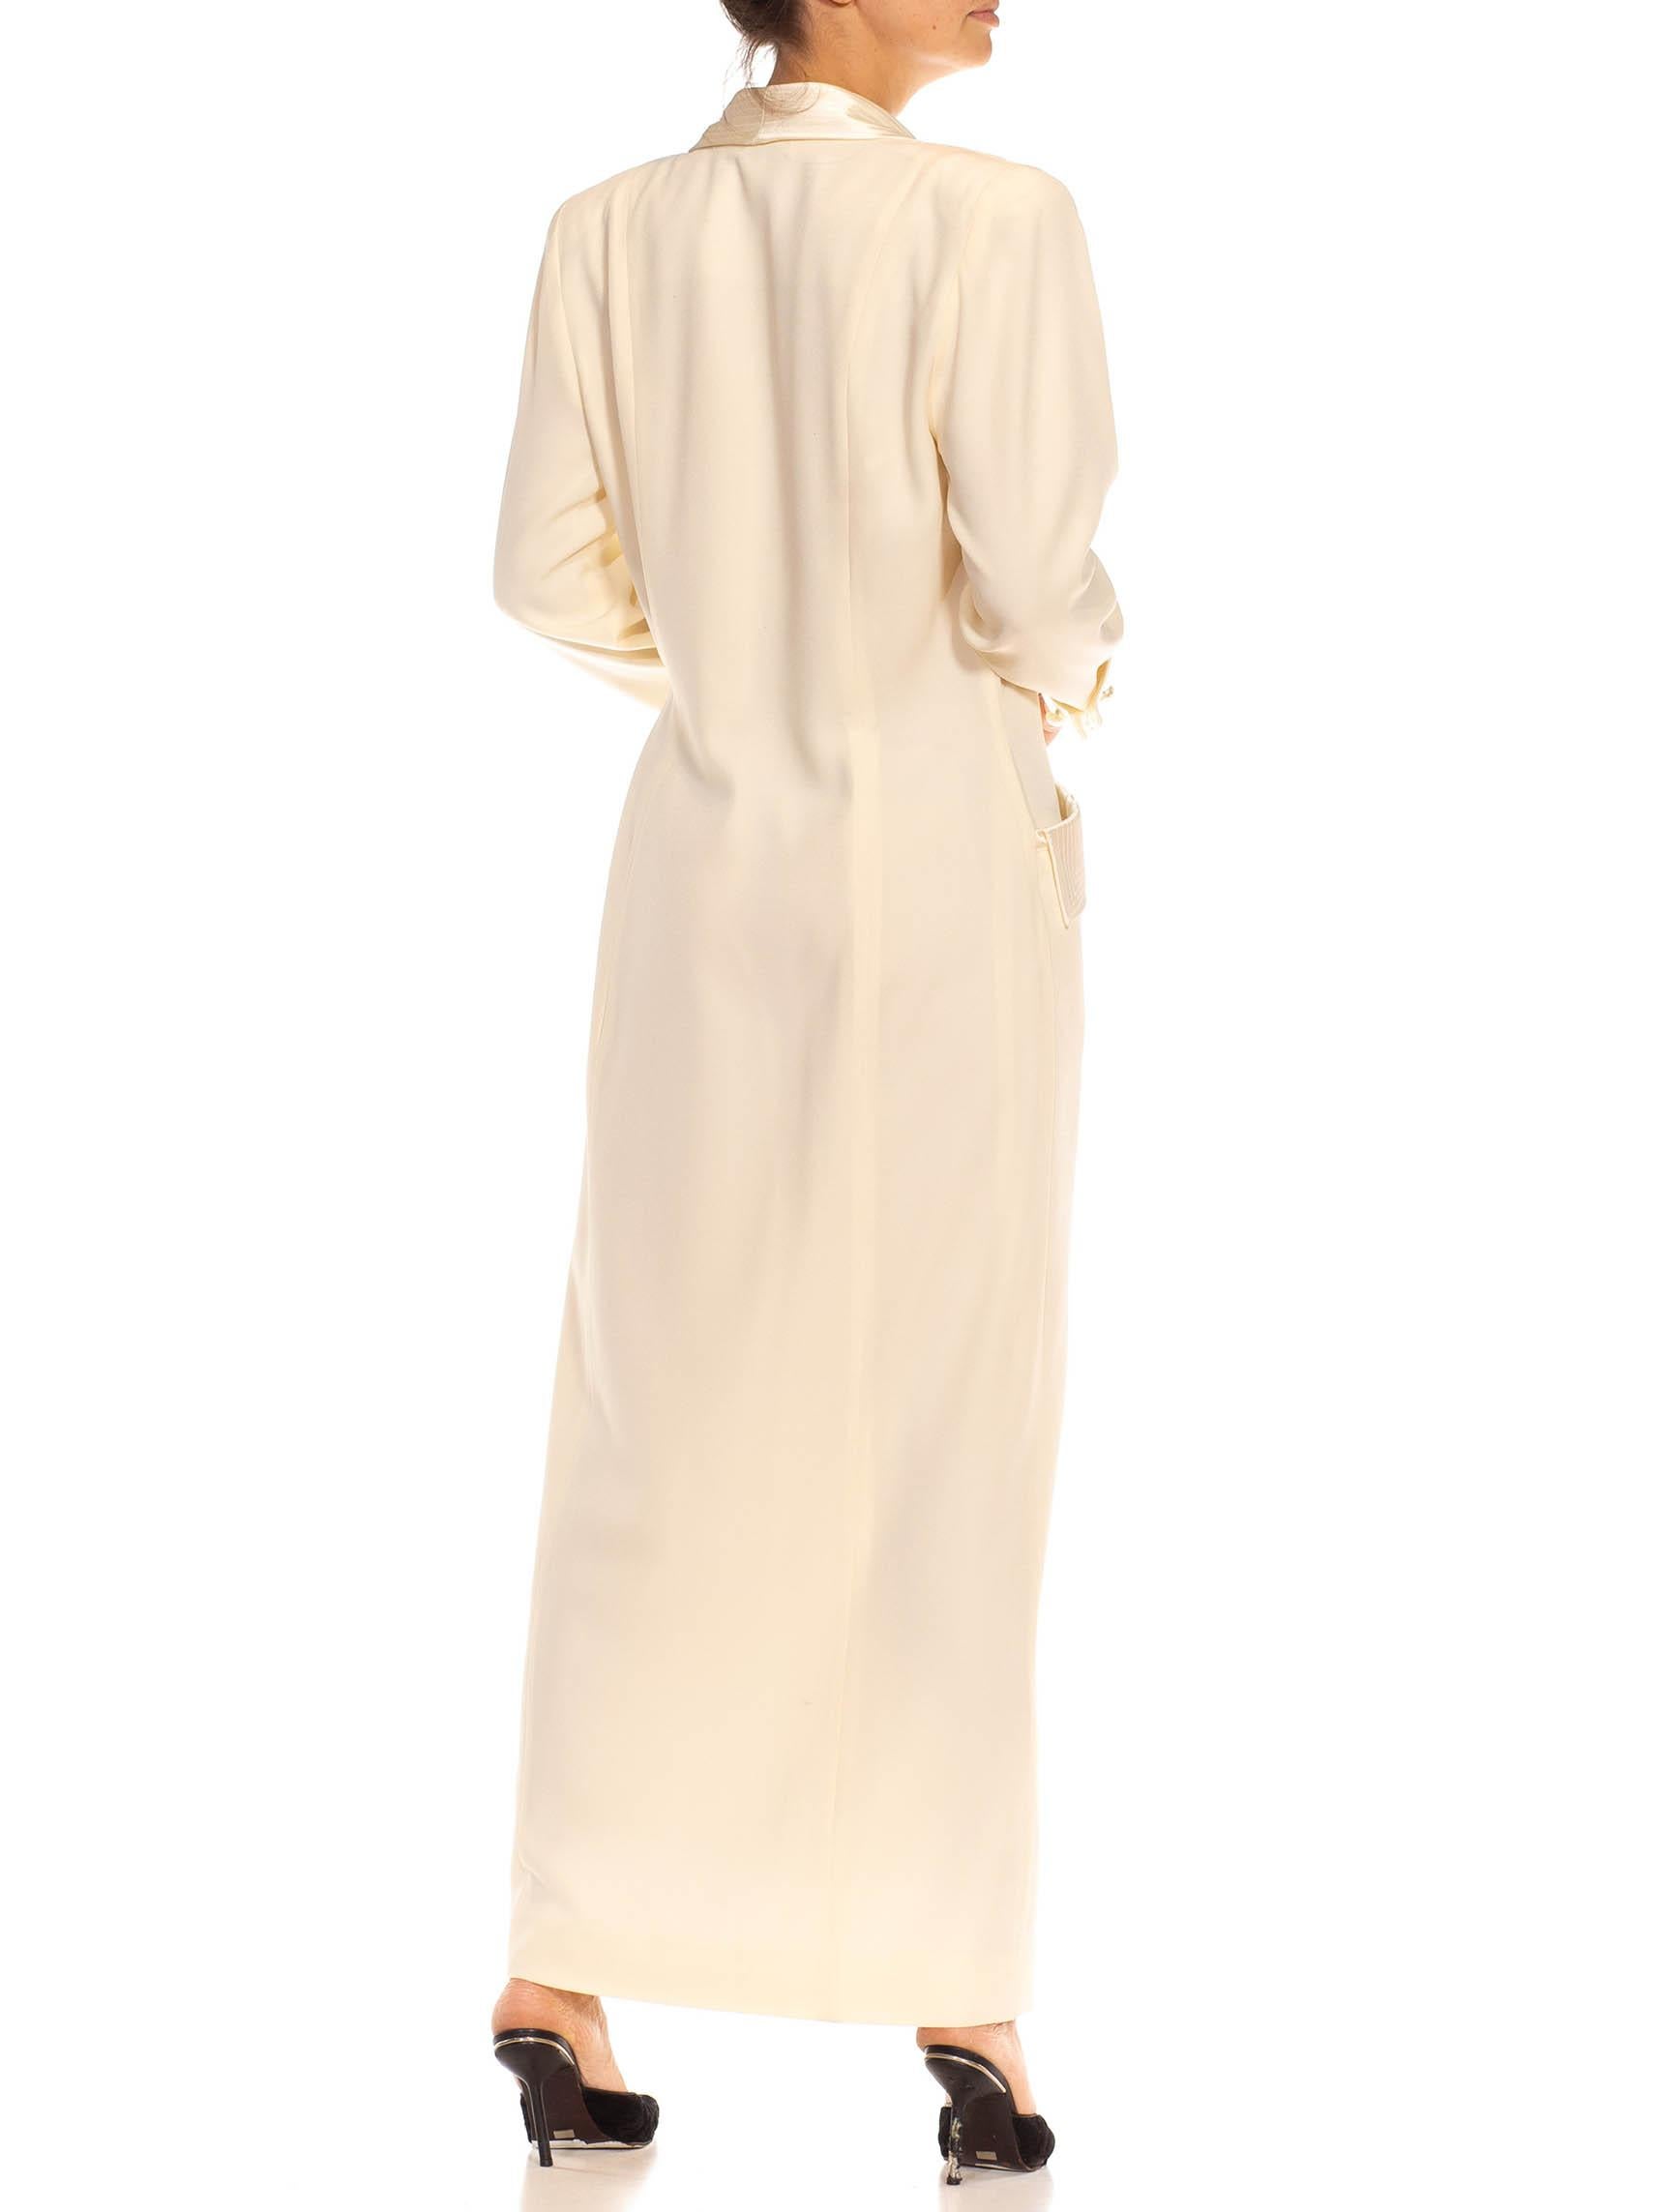 1980S Cream Polyester Glam Dress For Sale 3